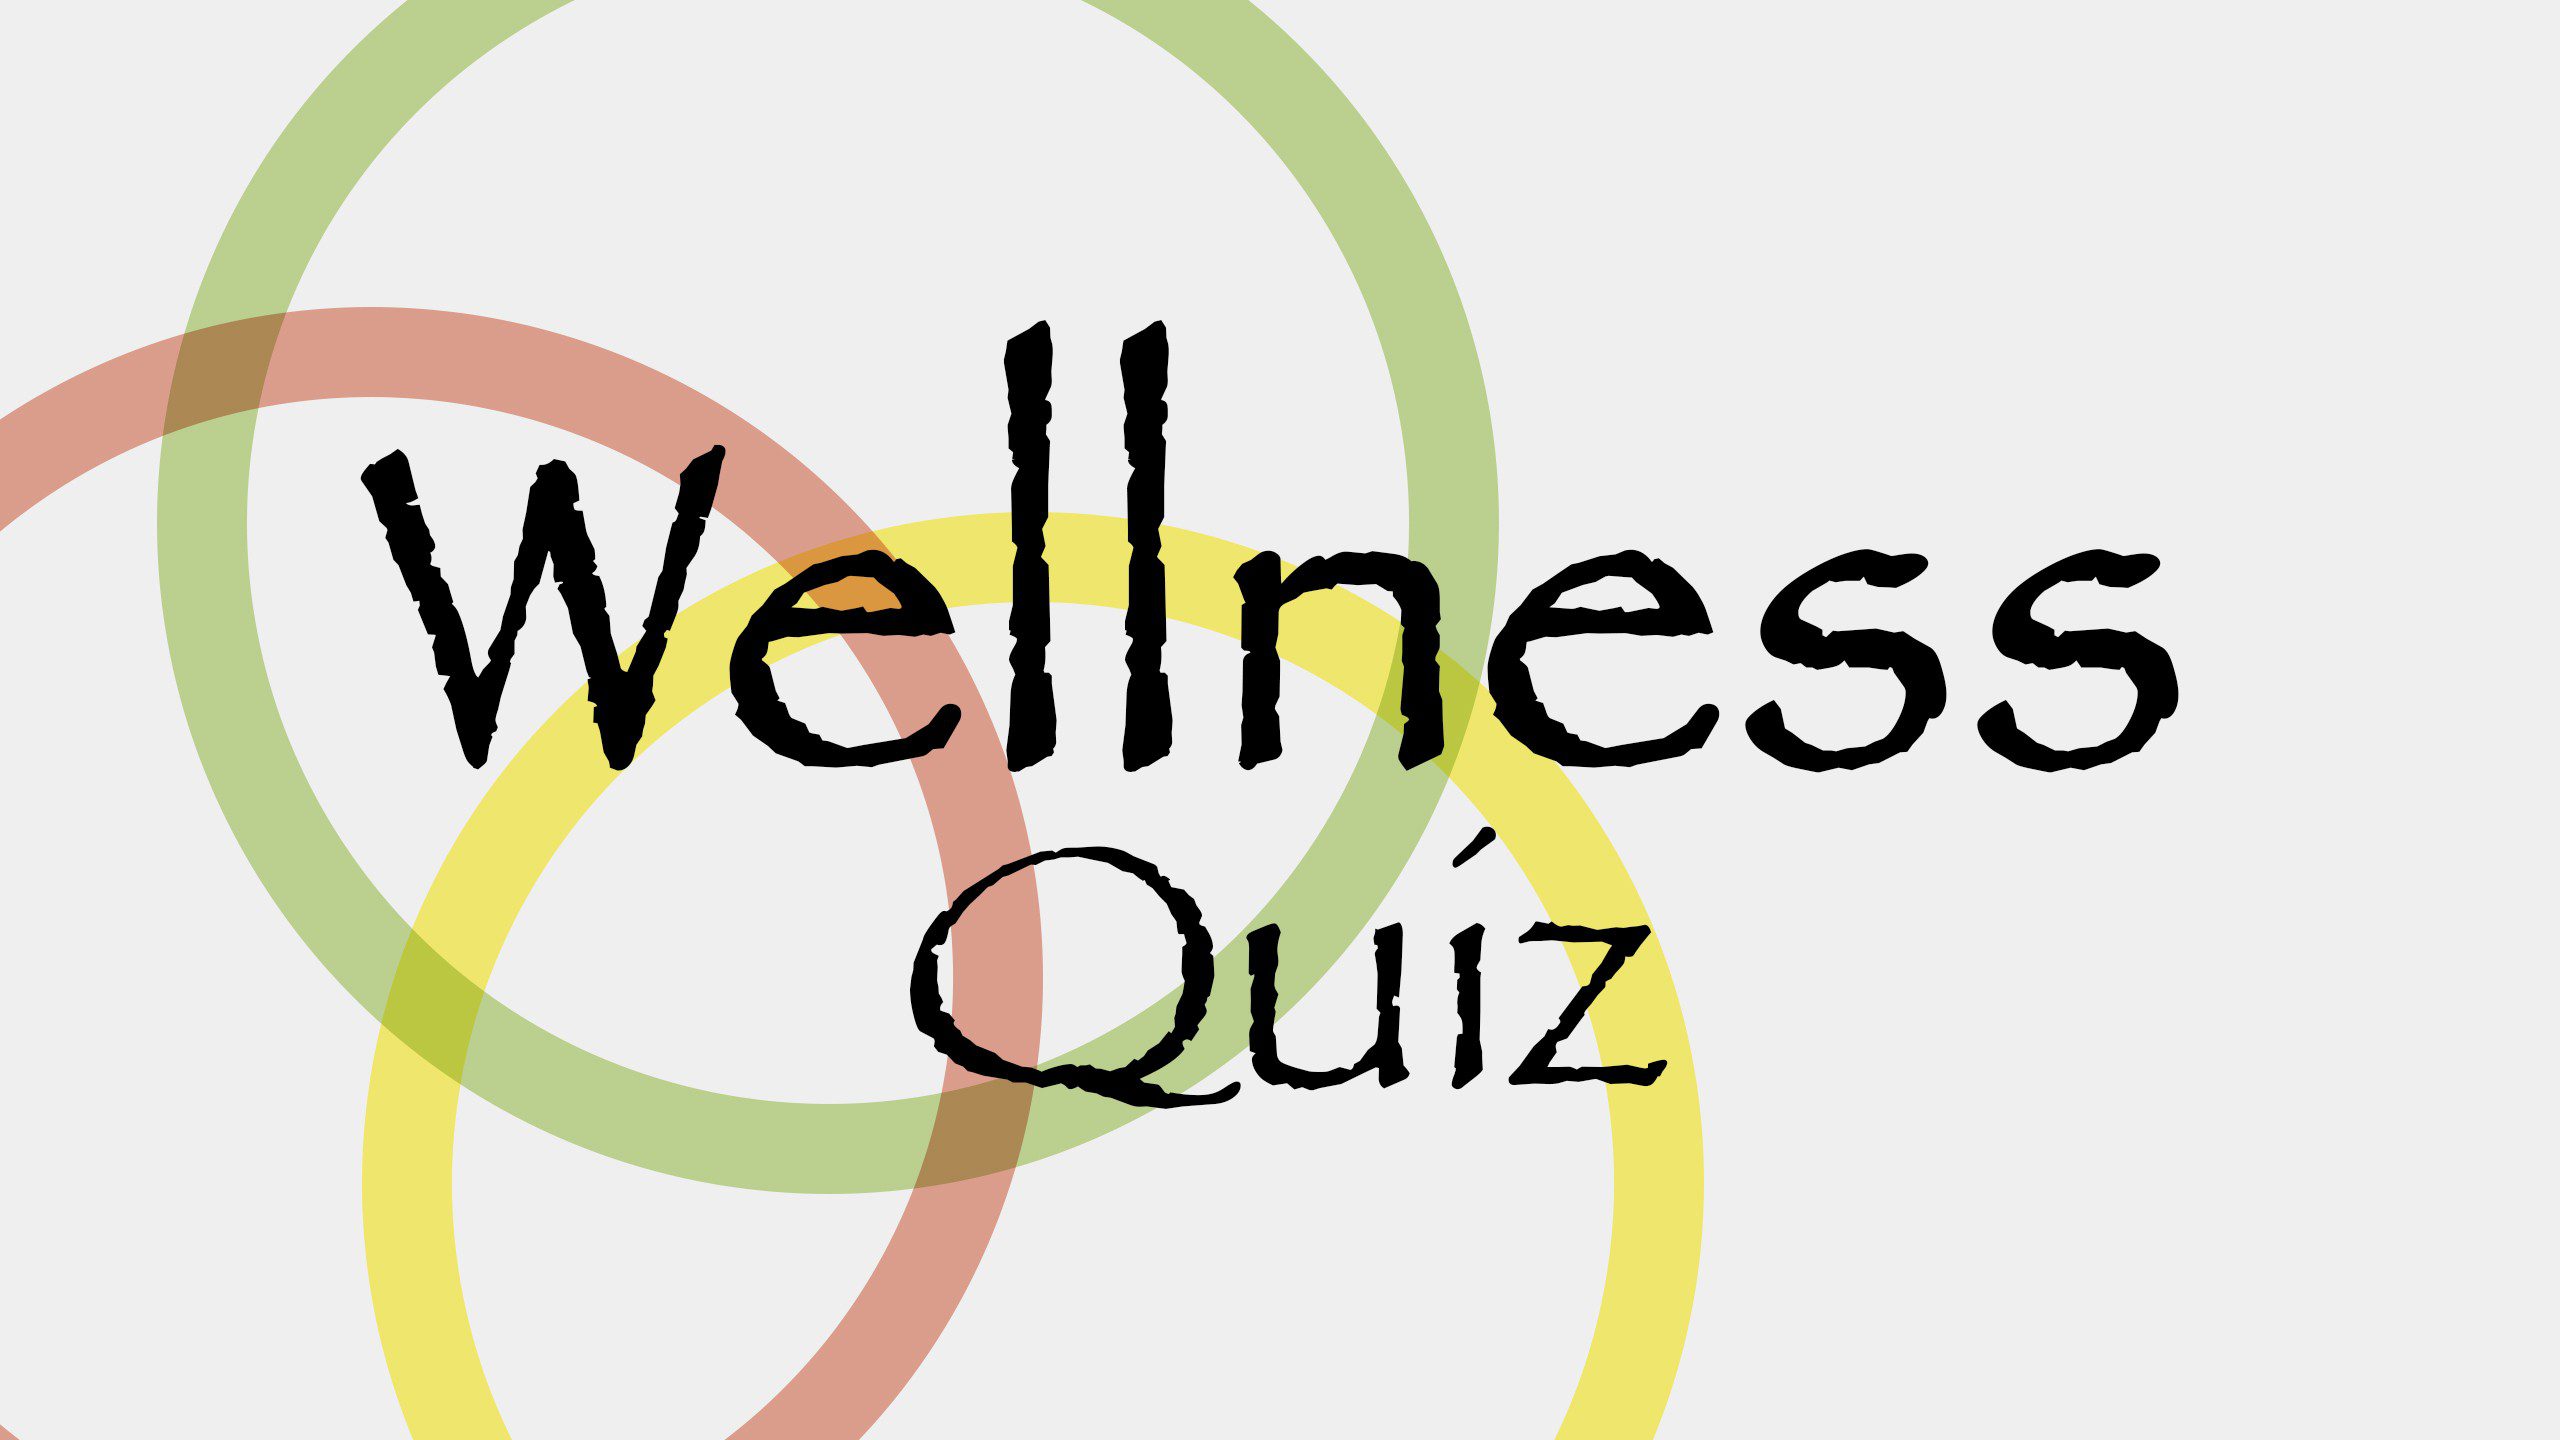 Time for A Tune Up? Take A Wellness Quiz